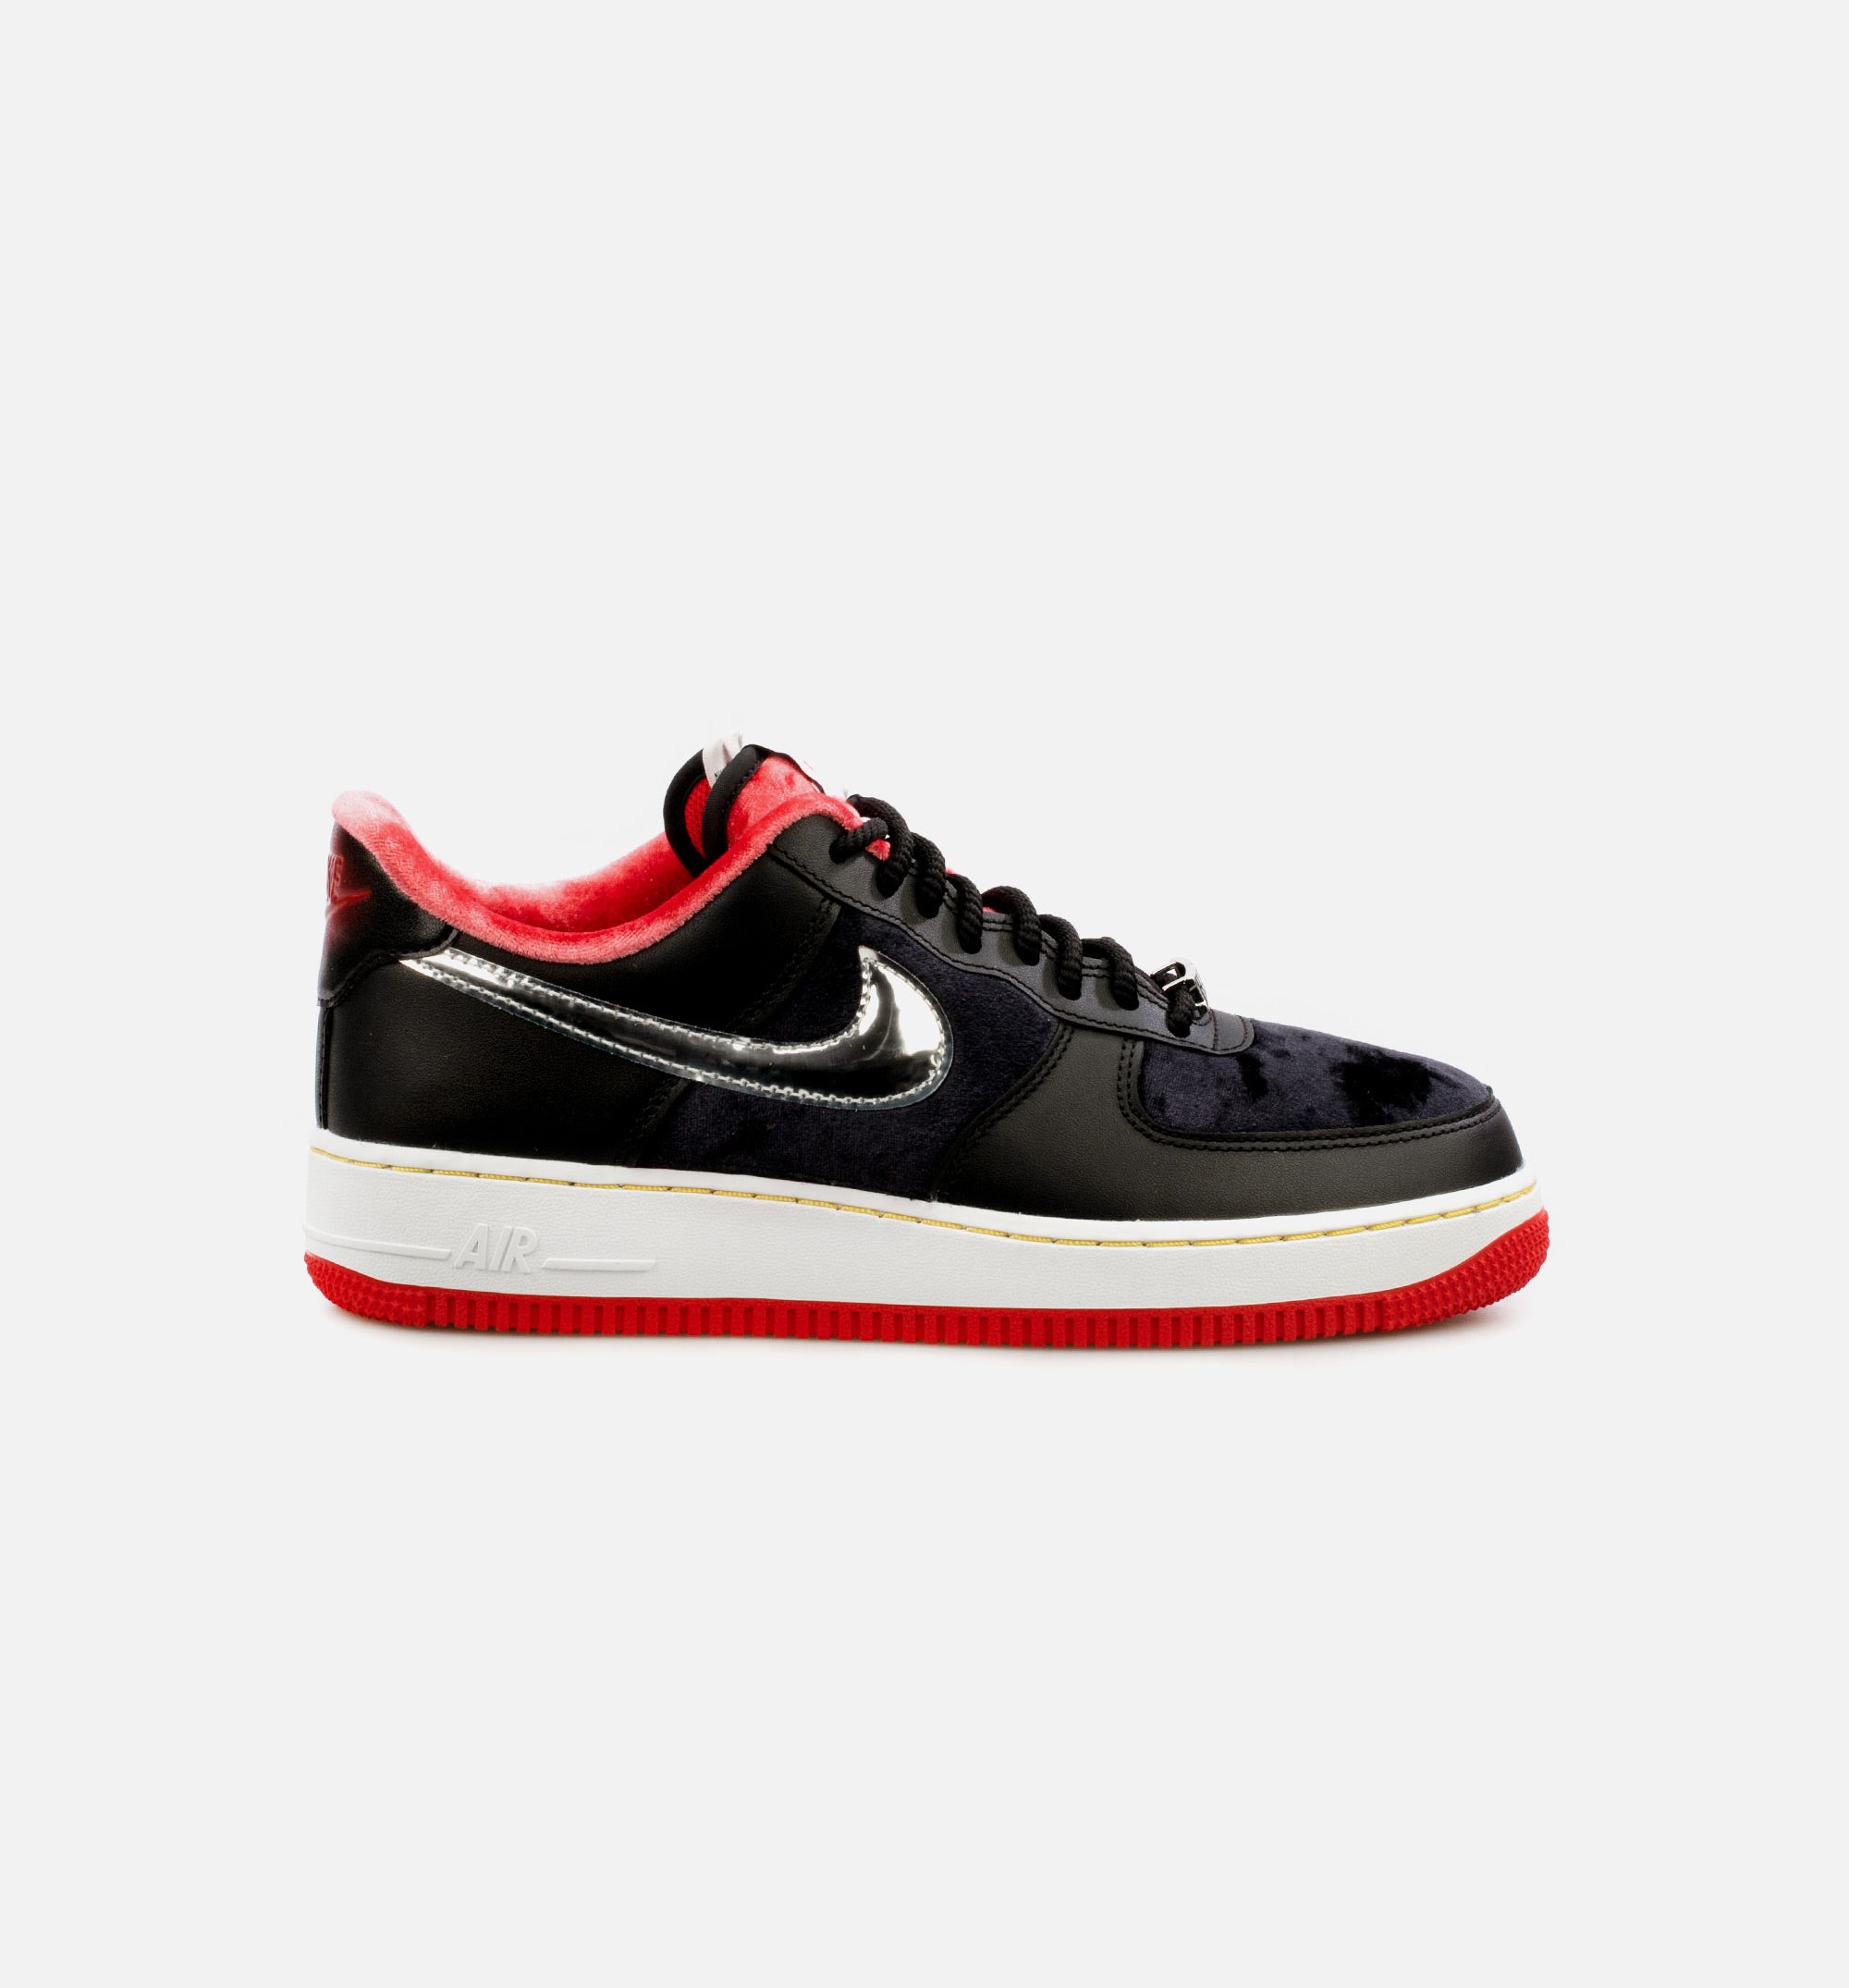 Nike Men's Air Force 1 Low '07 LV8 Basketball Shoes